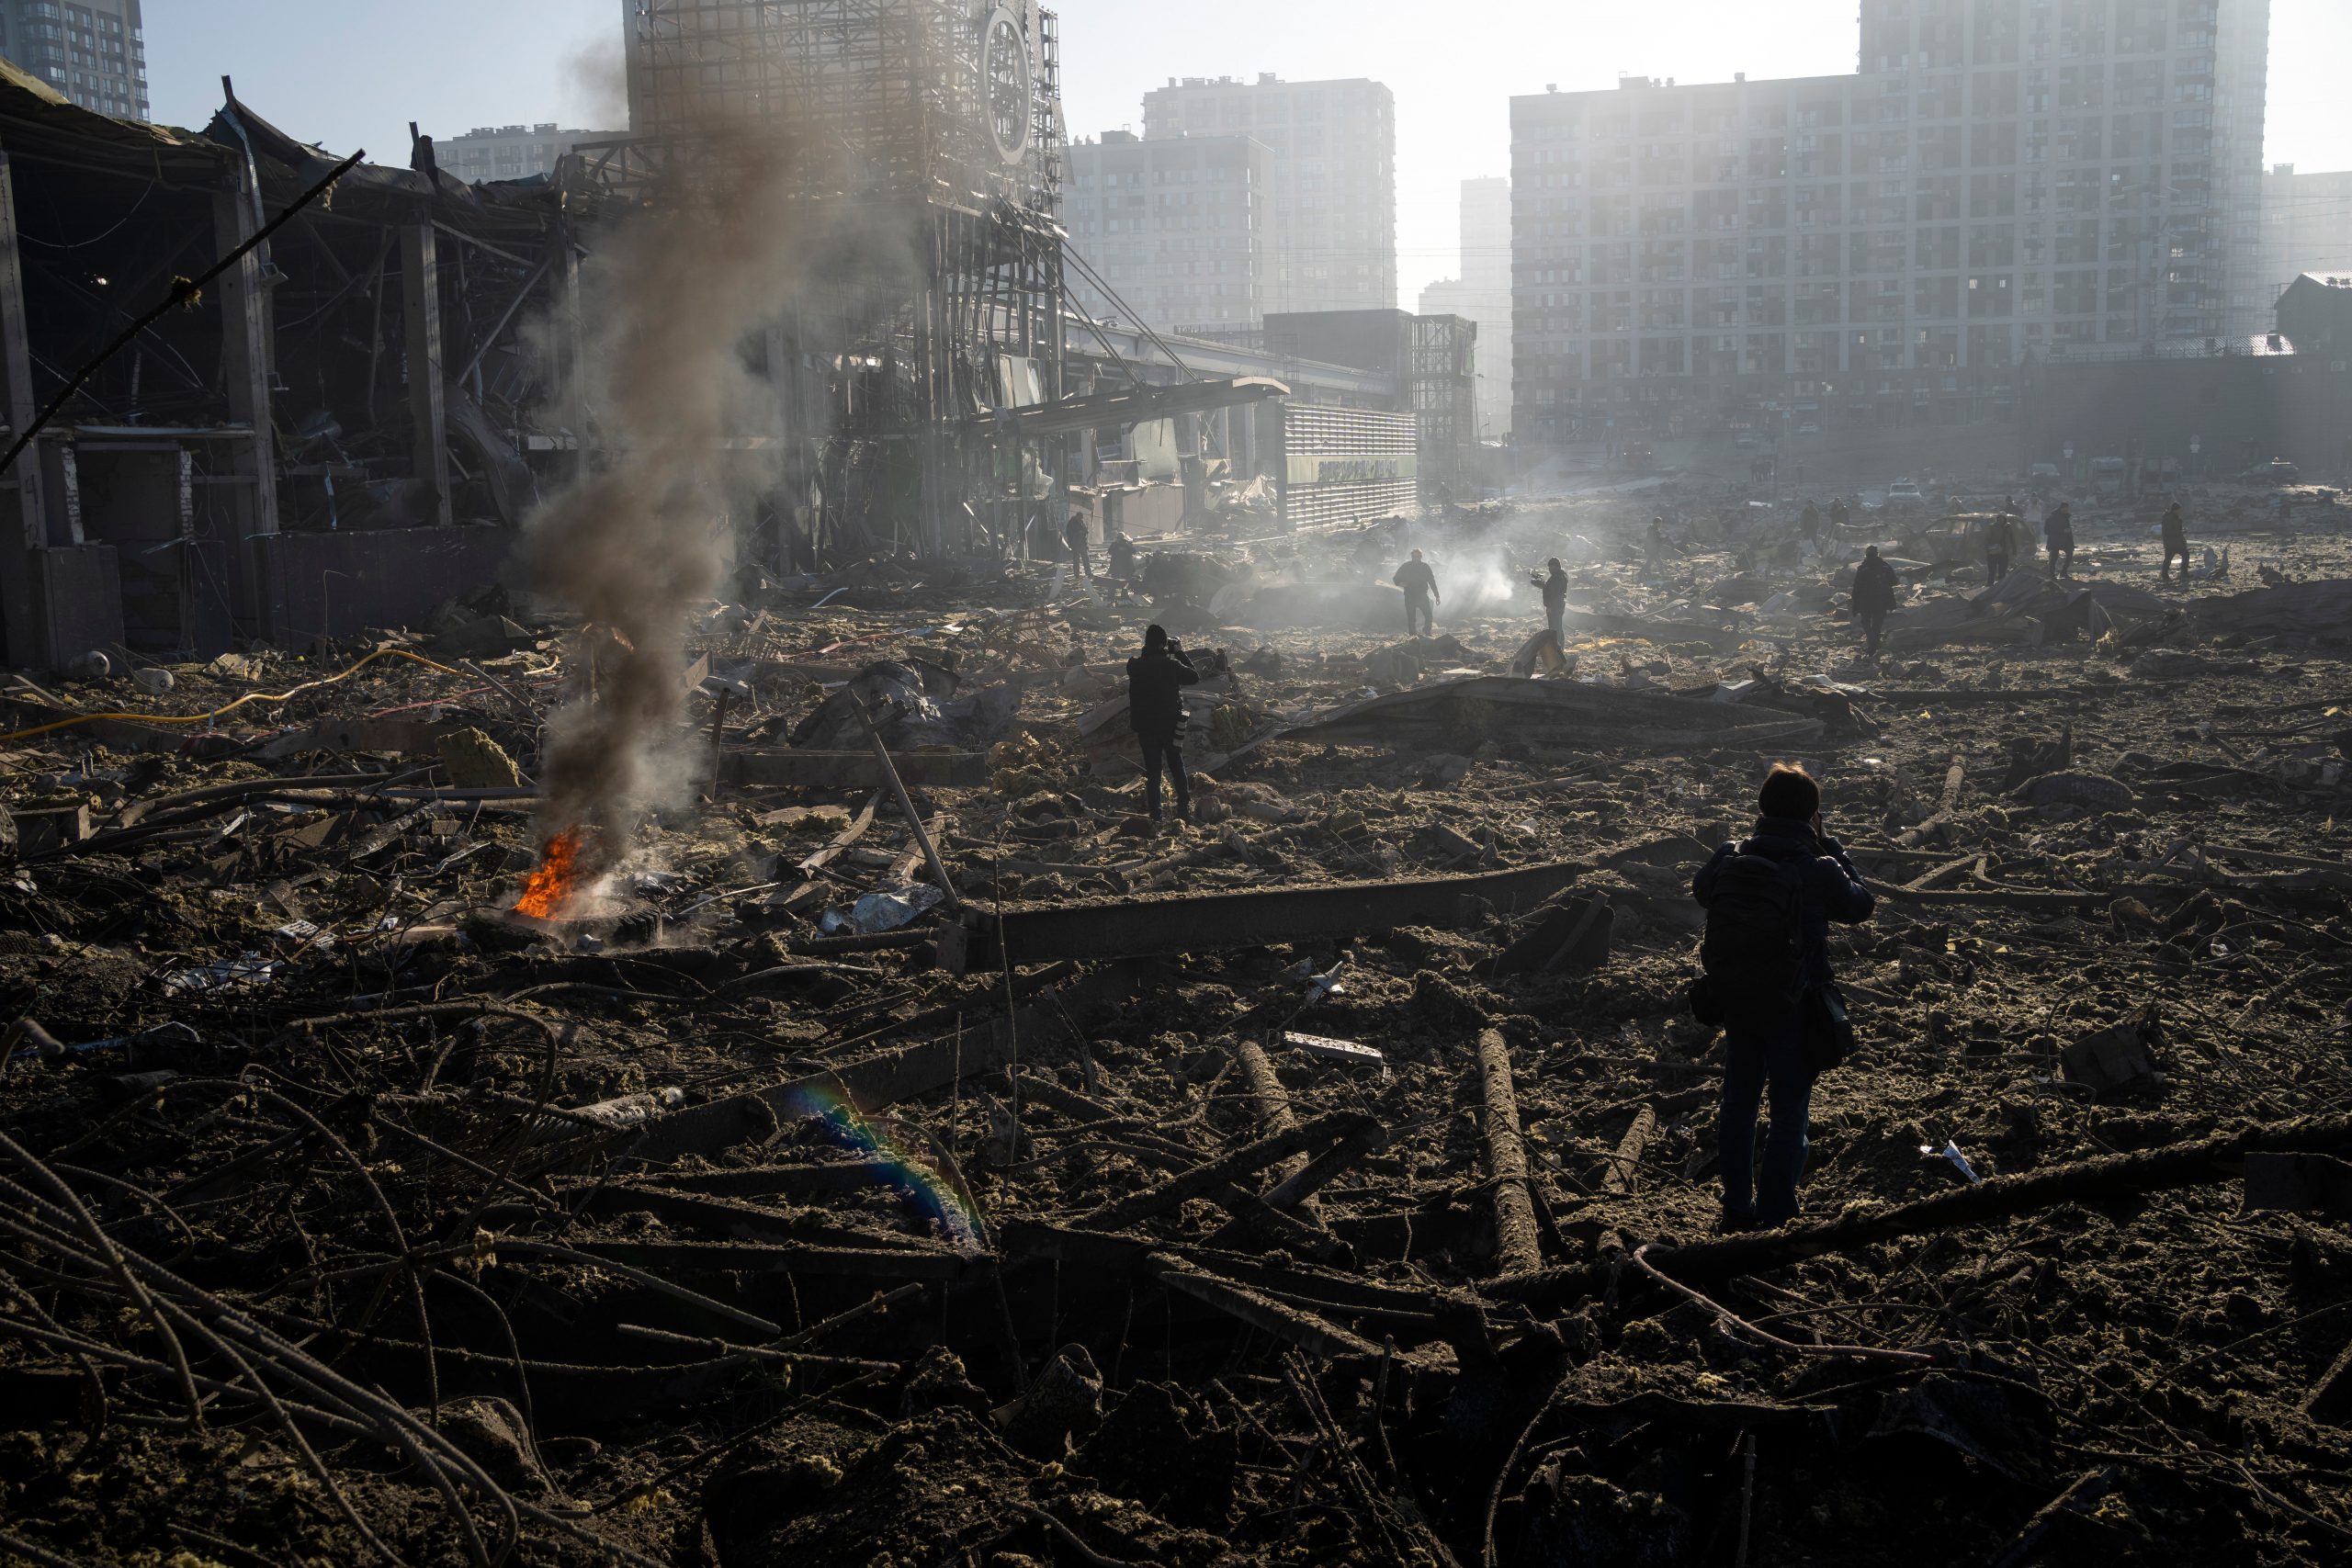 Mariupol, Ukraine city bombed every 10 mins, will not be given to Russia: Official